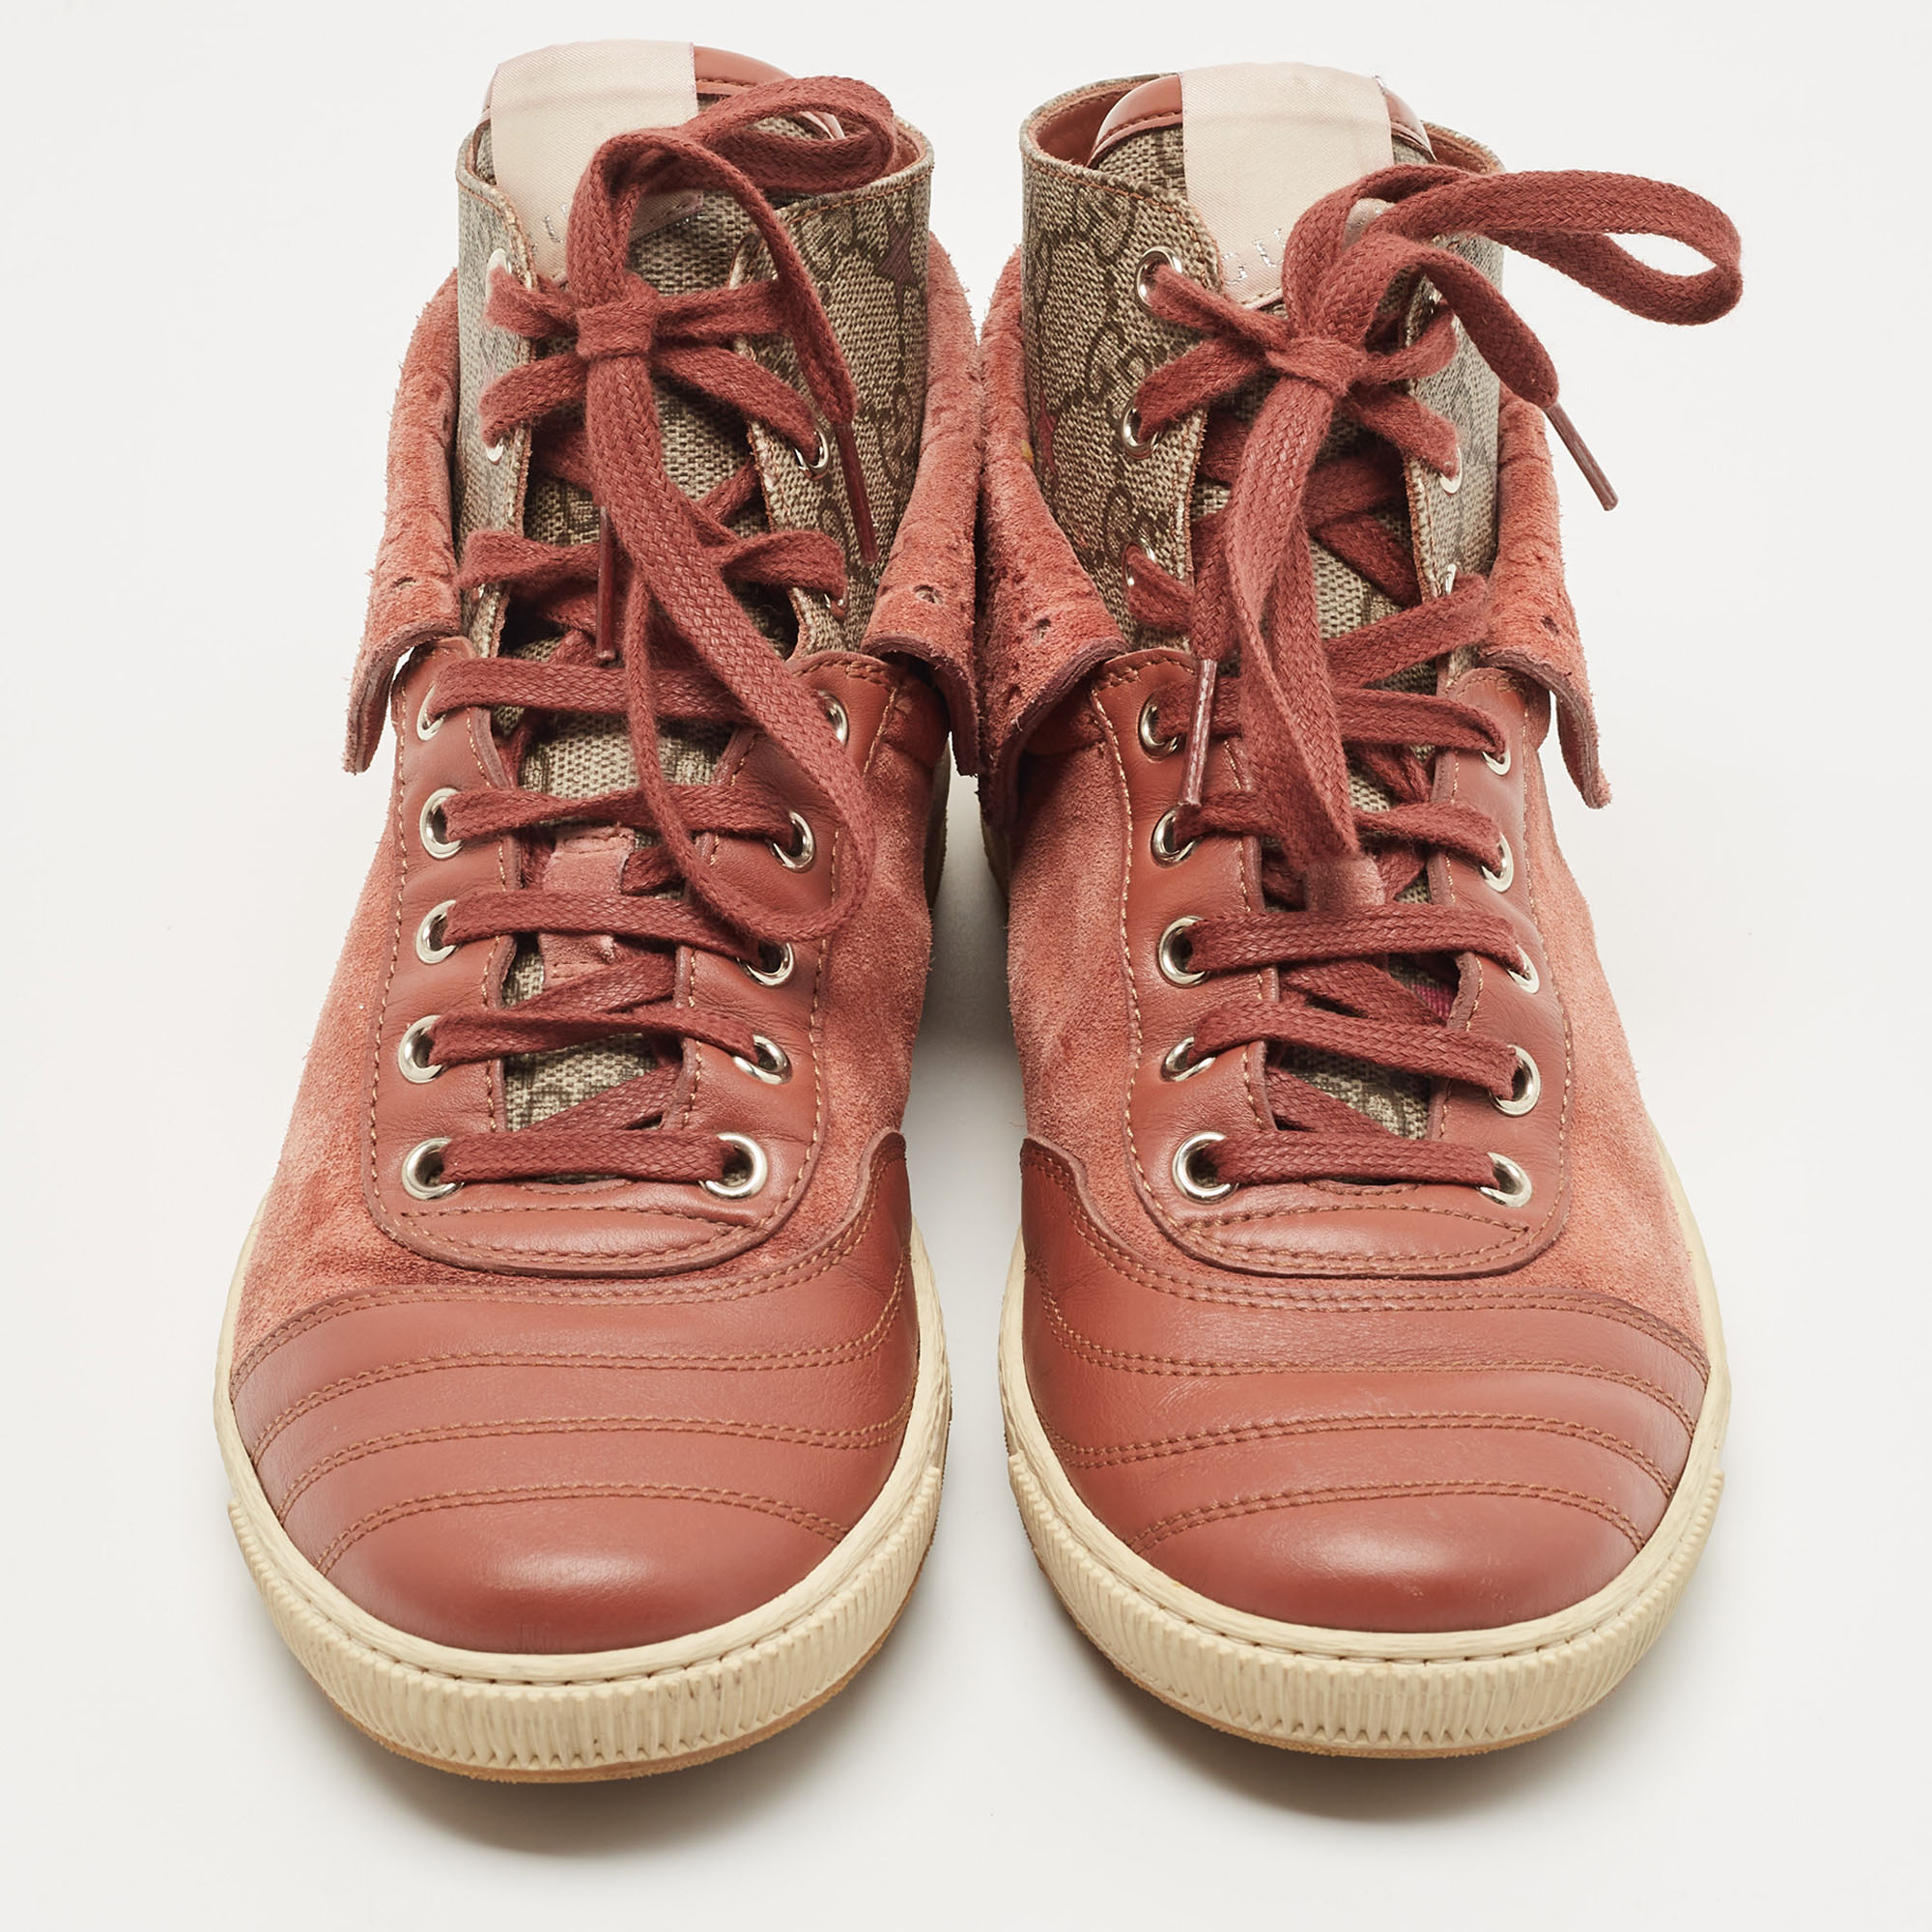 Gucci Pink Leather And Suede High Top Sneakers Size 38